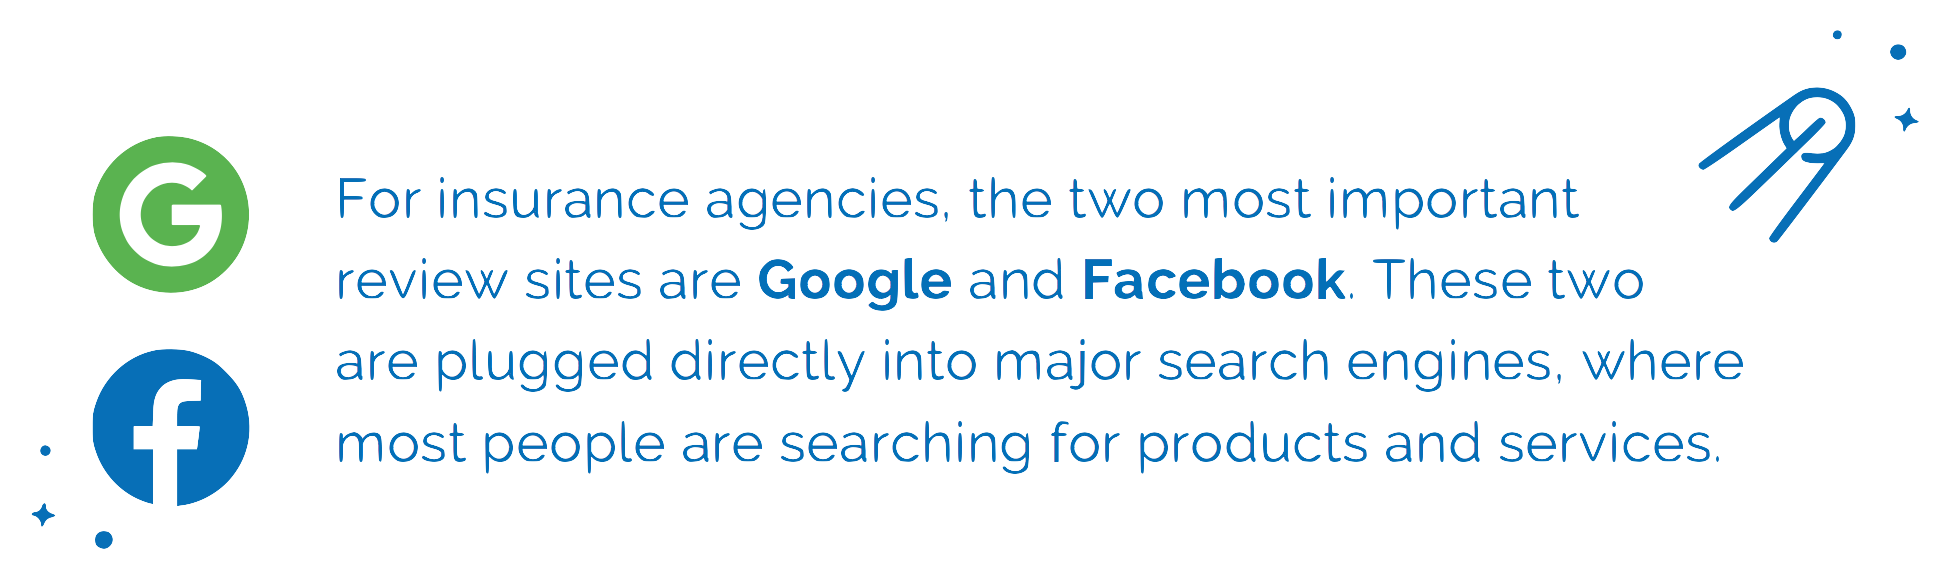 The two most important review sites for insurance agents are Google and Facebook